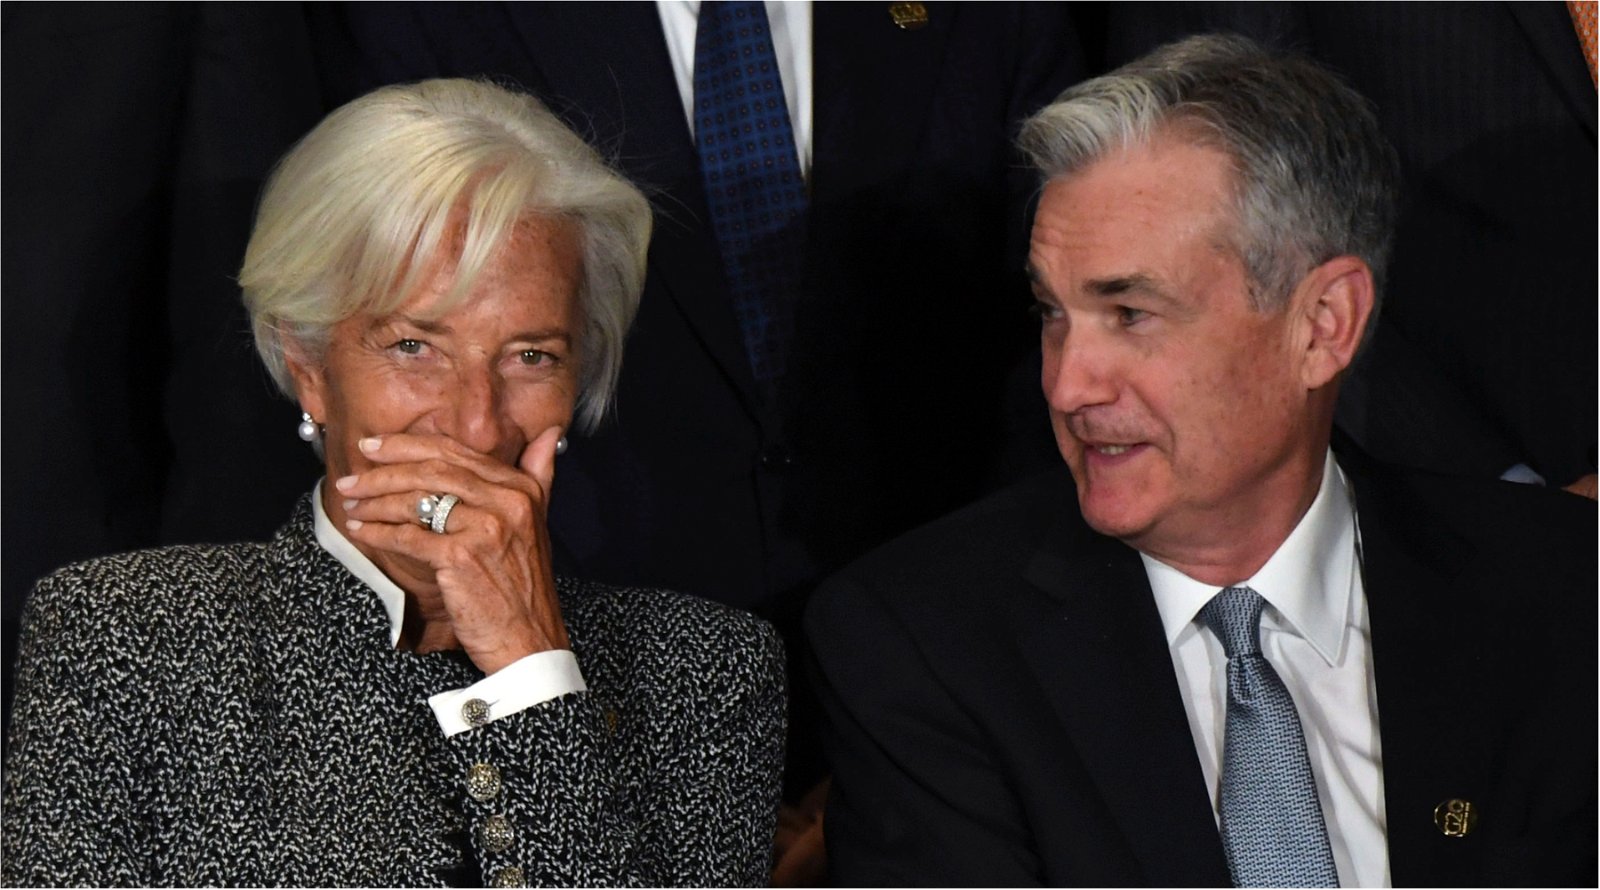 What can we expect from the European Central Bank and the Federal Reserve next week?